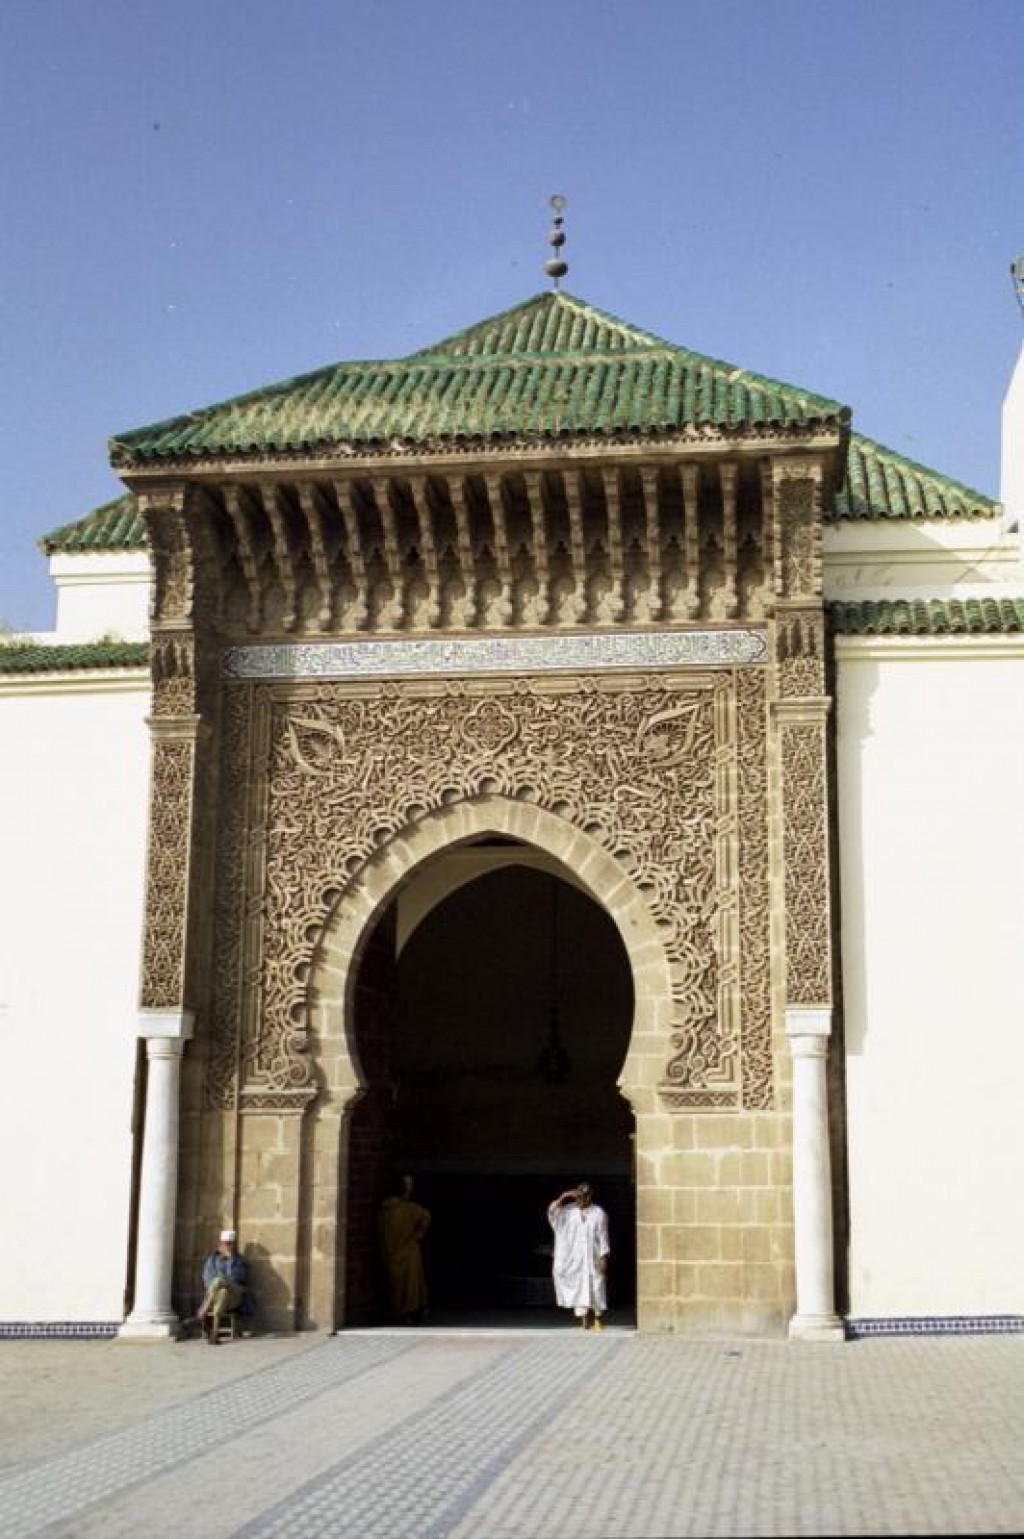 This is entrance to the tomb of Moulay Ismail.